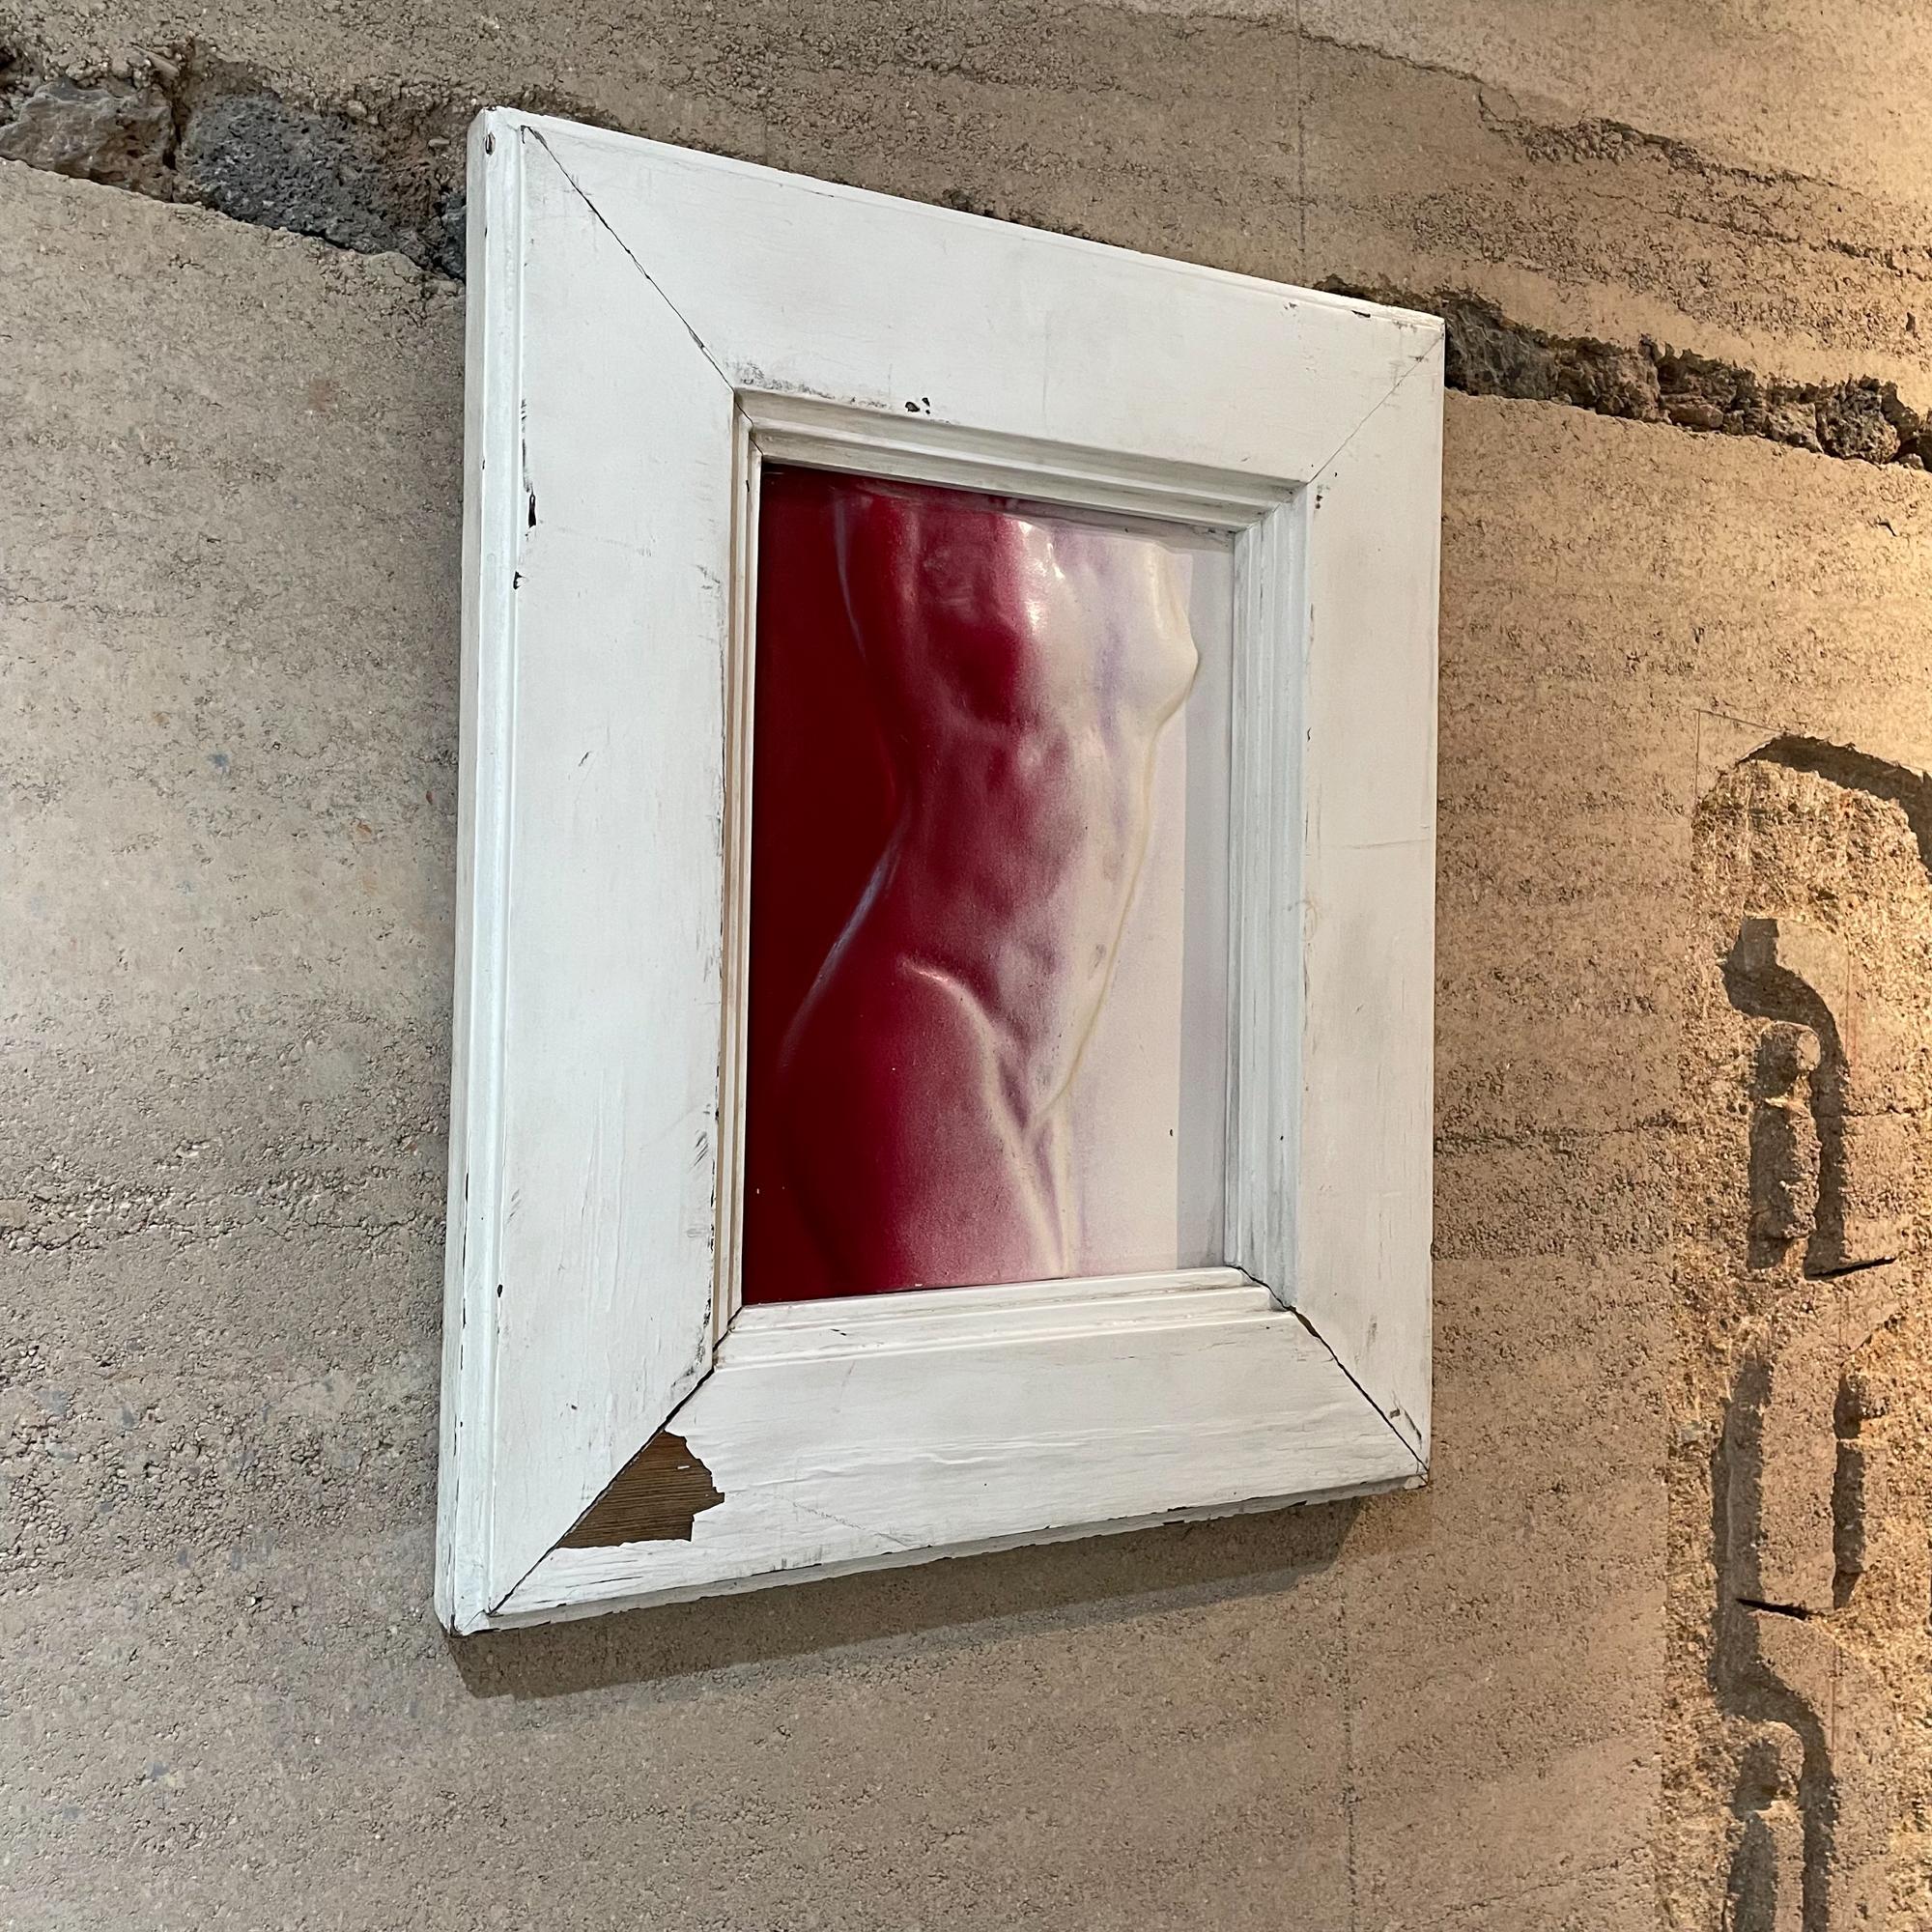 Vintage female nude torso wall art in cast aluminum metal. Patinated. In white and red.
Wood frame painted in white.
Measures: 21.5 tall x 17.63 W x 1.75 D, Art 12.75 tall x 9 .25
Unrestored preowned piece in vintage condition. Patina present.